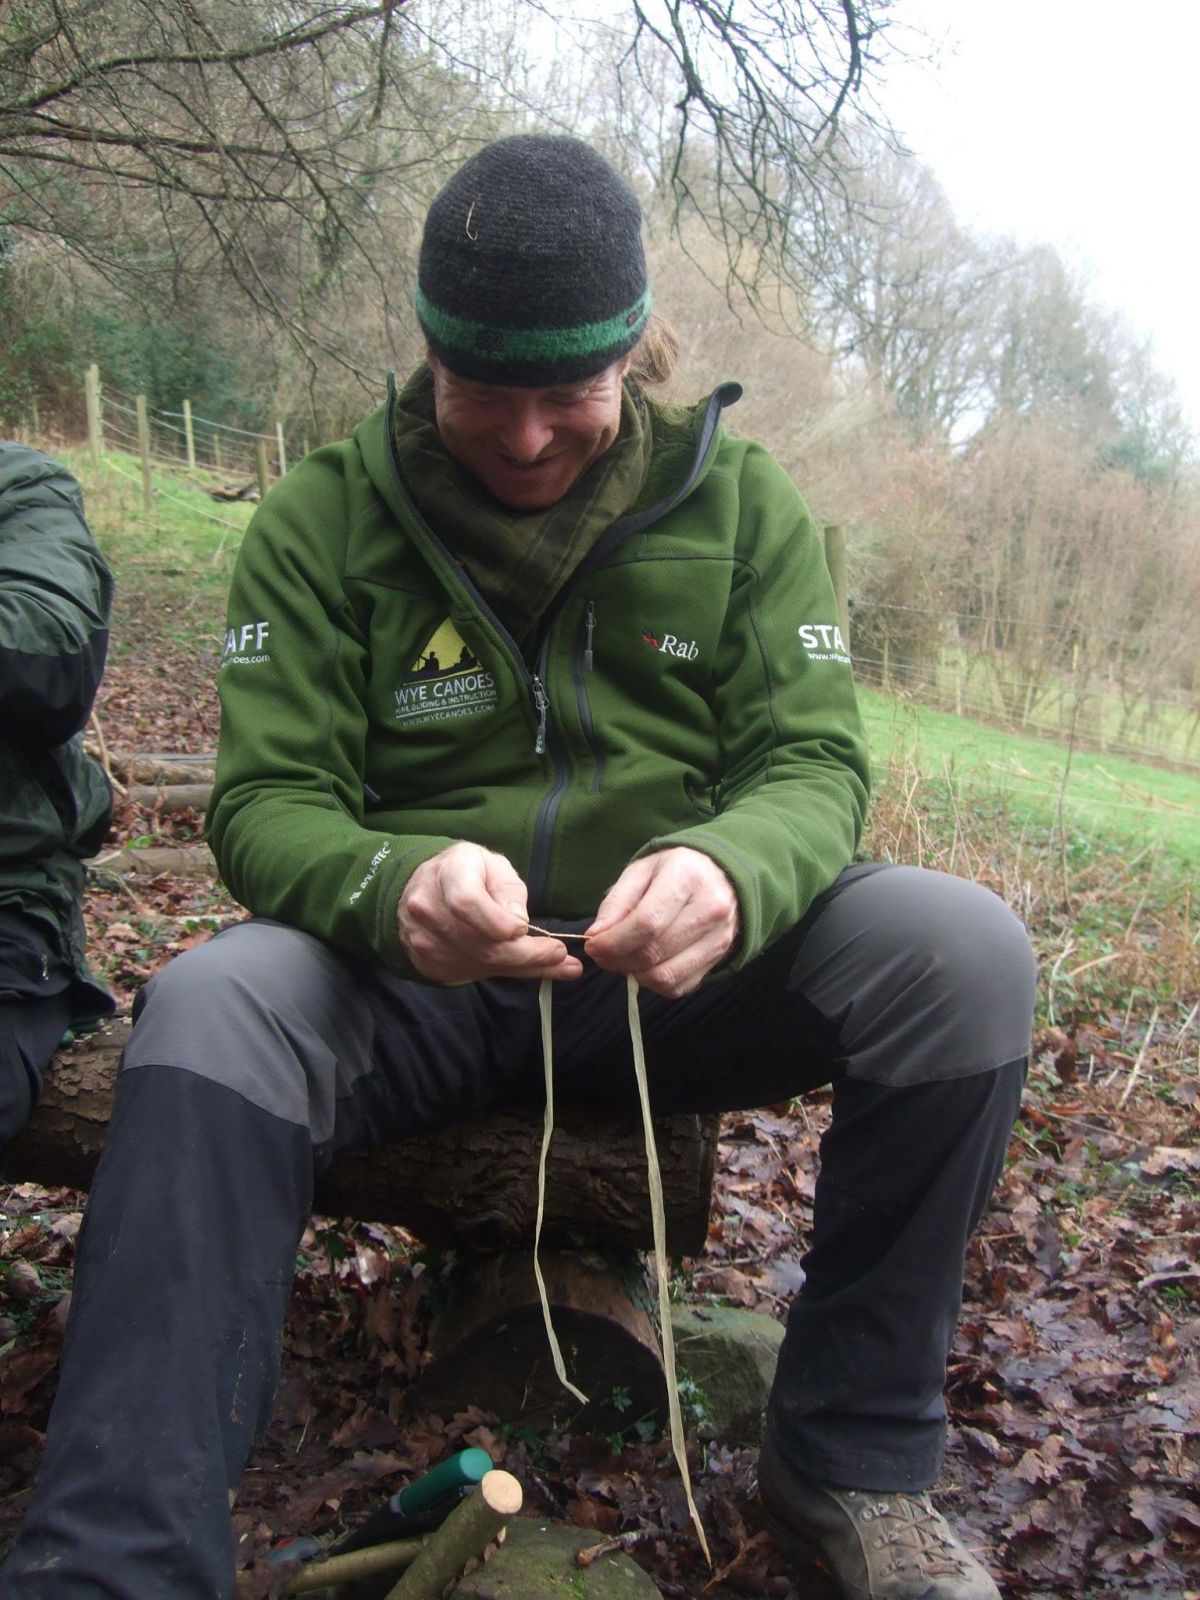 Learning how to make cordage on a bushcraft session.